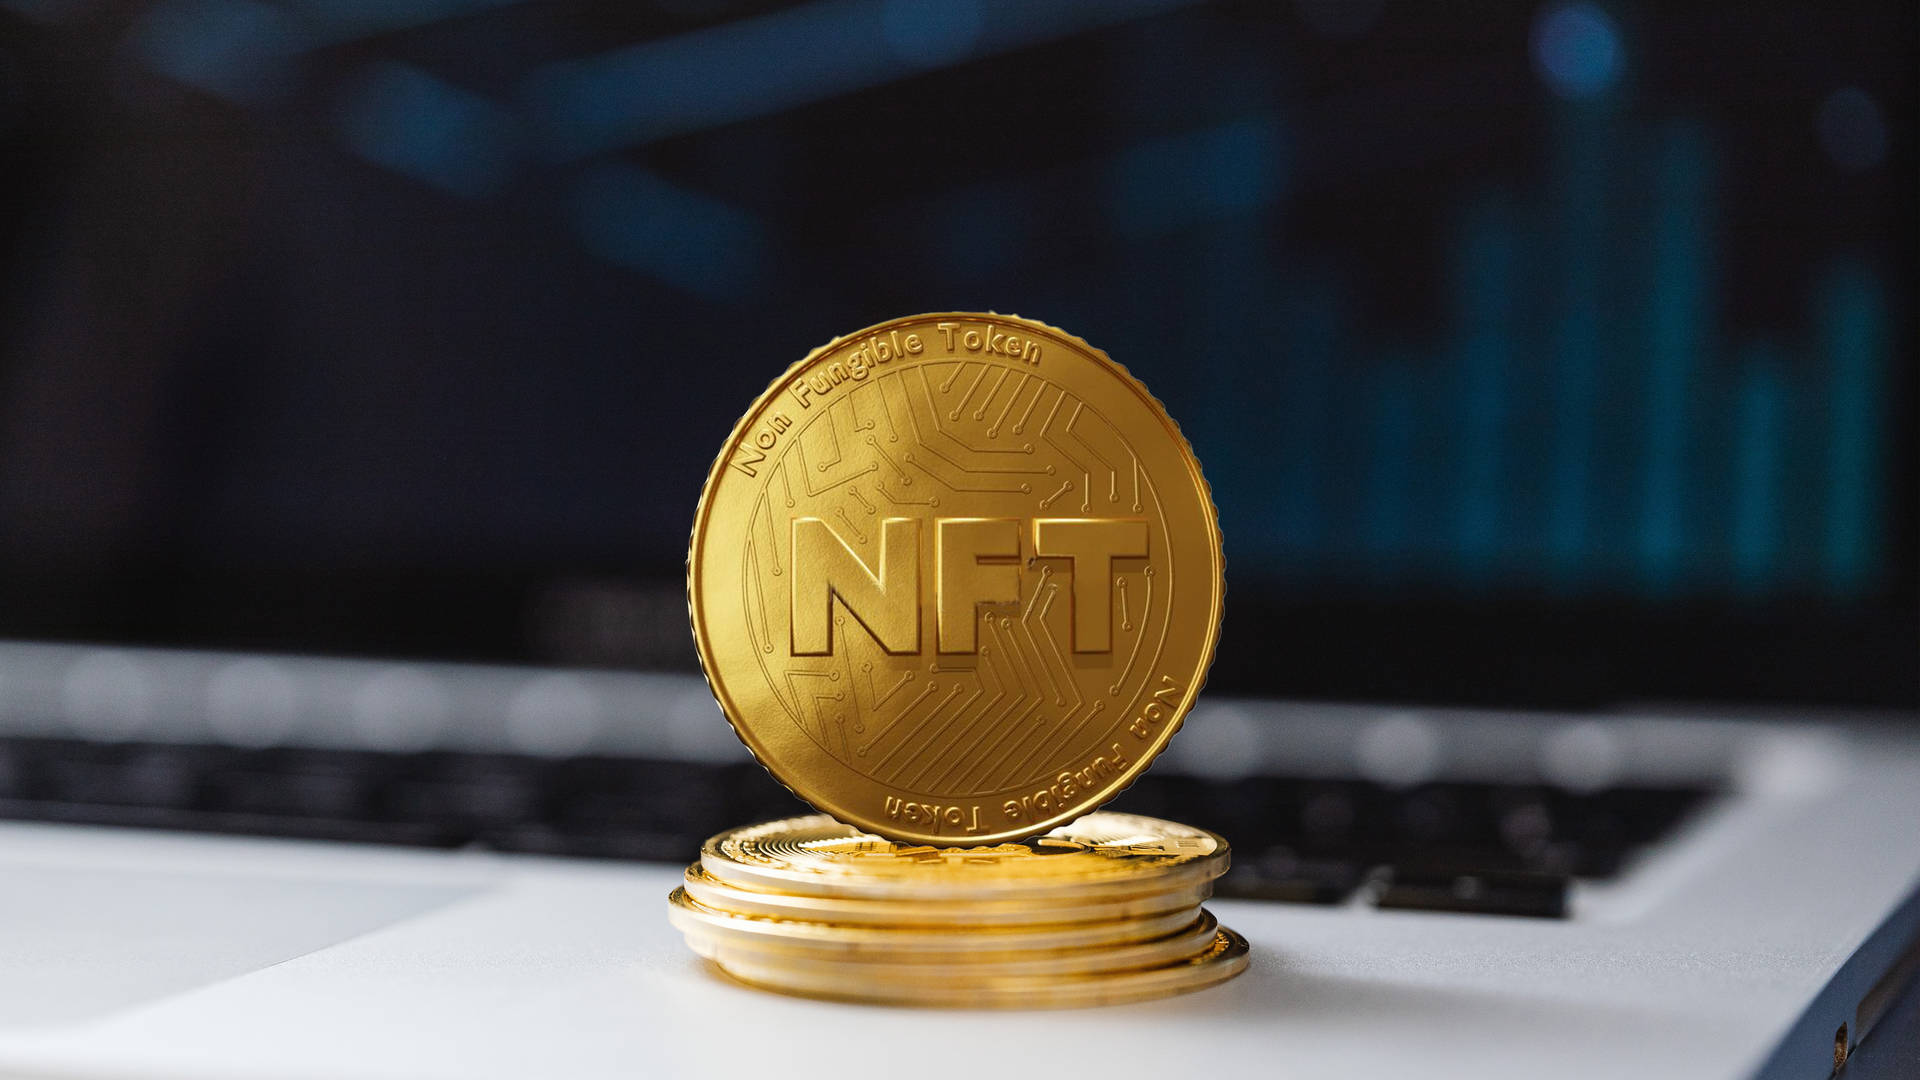 Nft Gold Coin Trophy Background